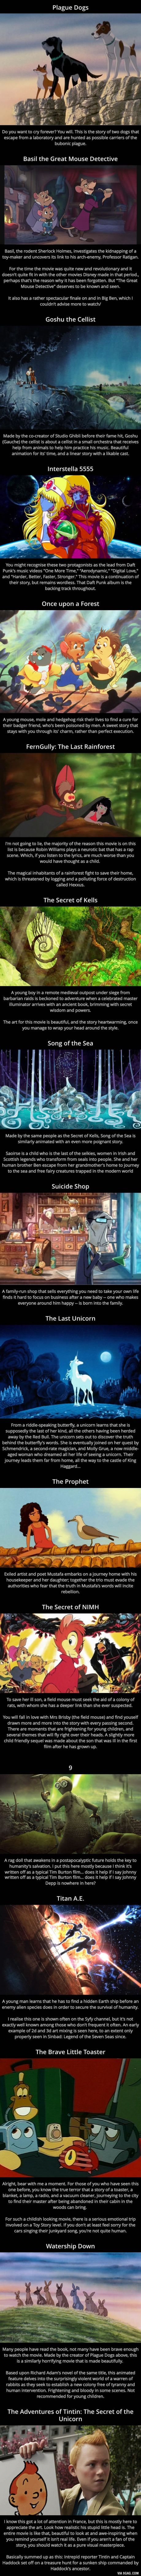 Underappreciated (or overlooked) animated movies